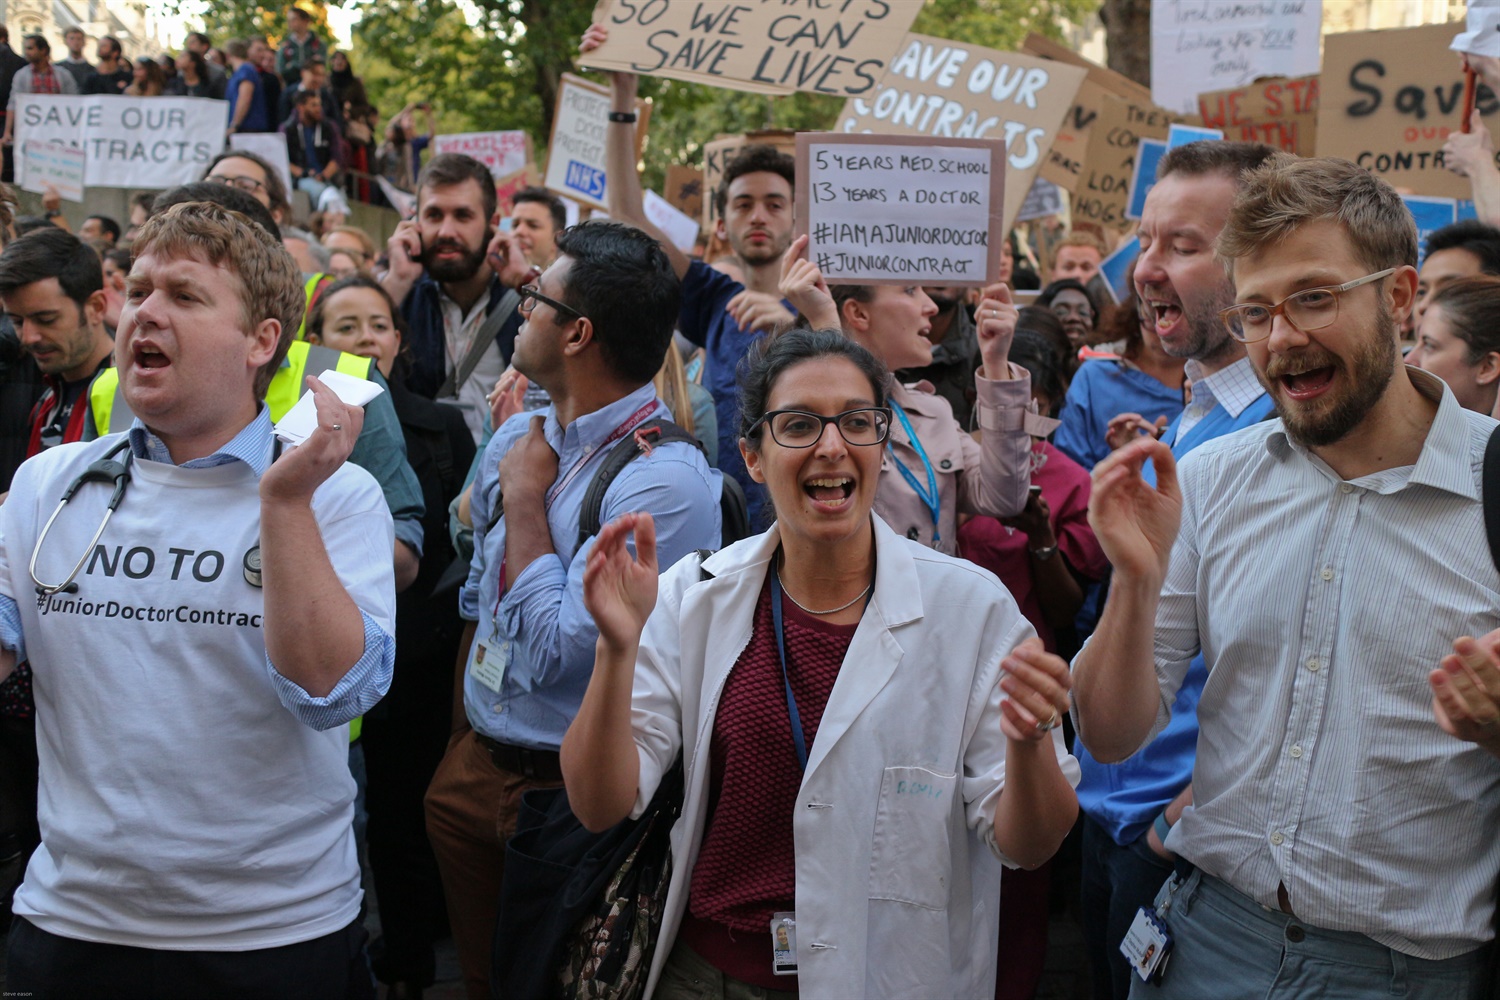 Not Safe - Not fair protest by doctors, junior doctors and medical students in central London 28th September 2015. c. Steve Eason